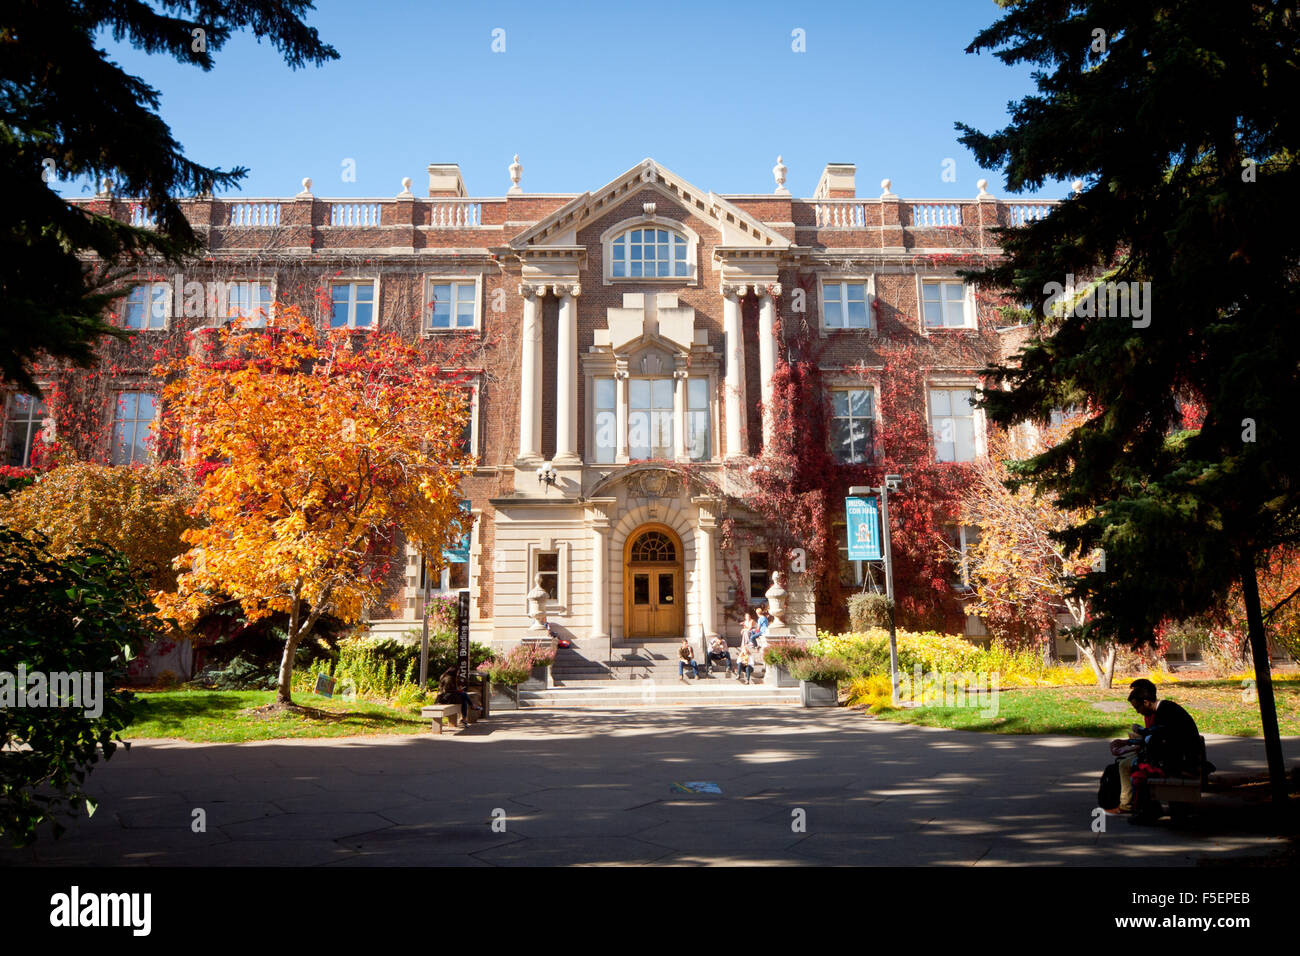 A wide angle, exterior view of the Old Arts Building at the University of Alberta in Edmonton, Alberta, Canada. Stock Photo